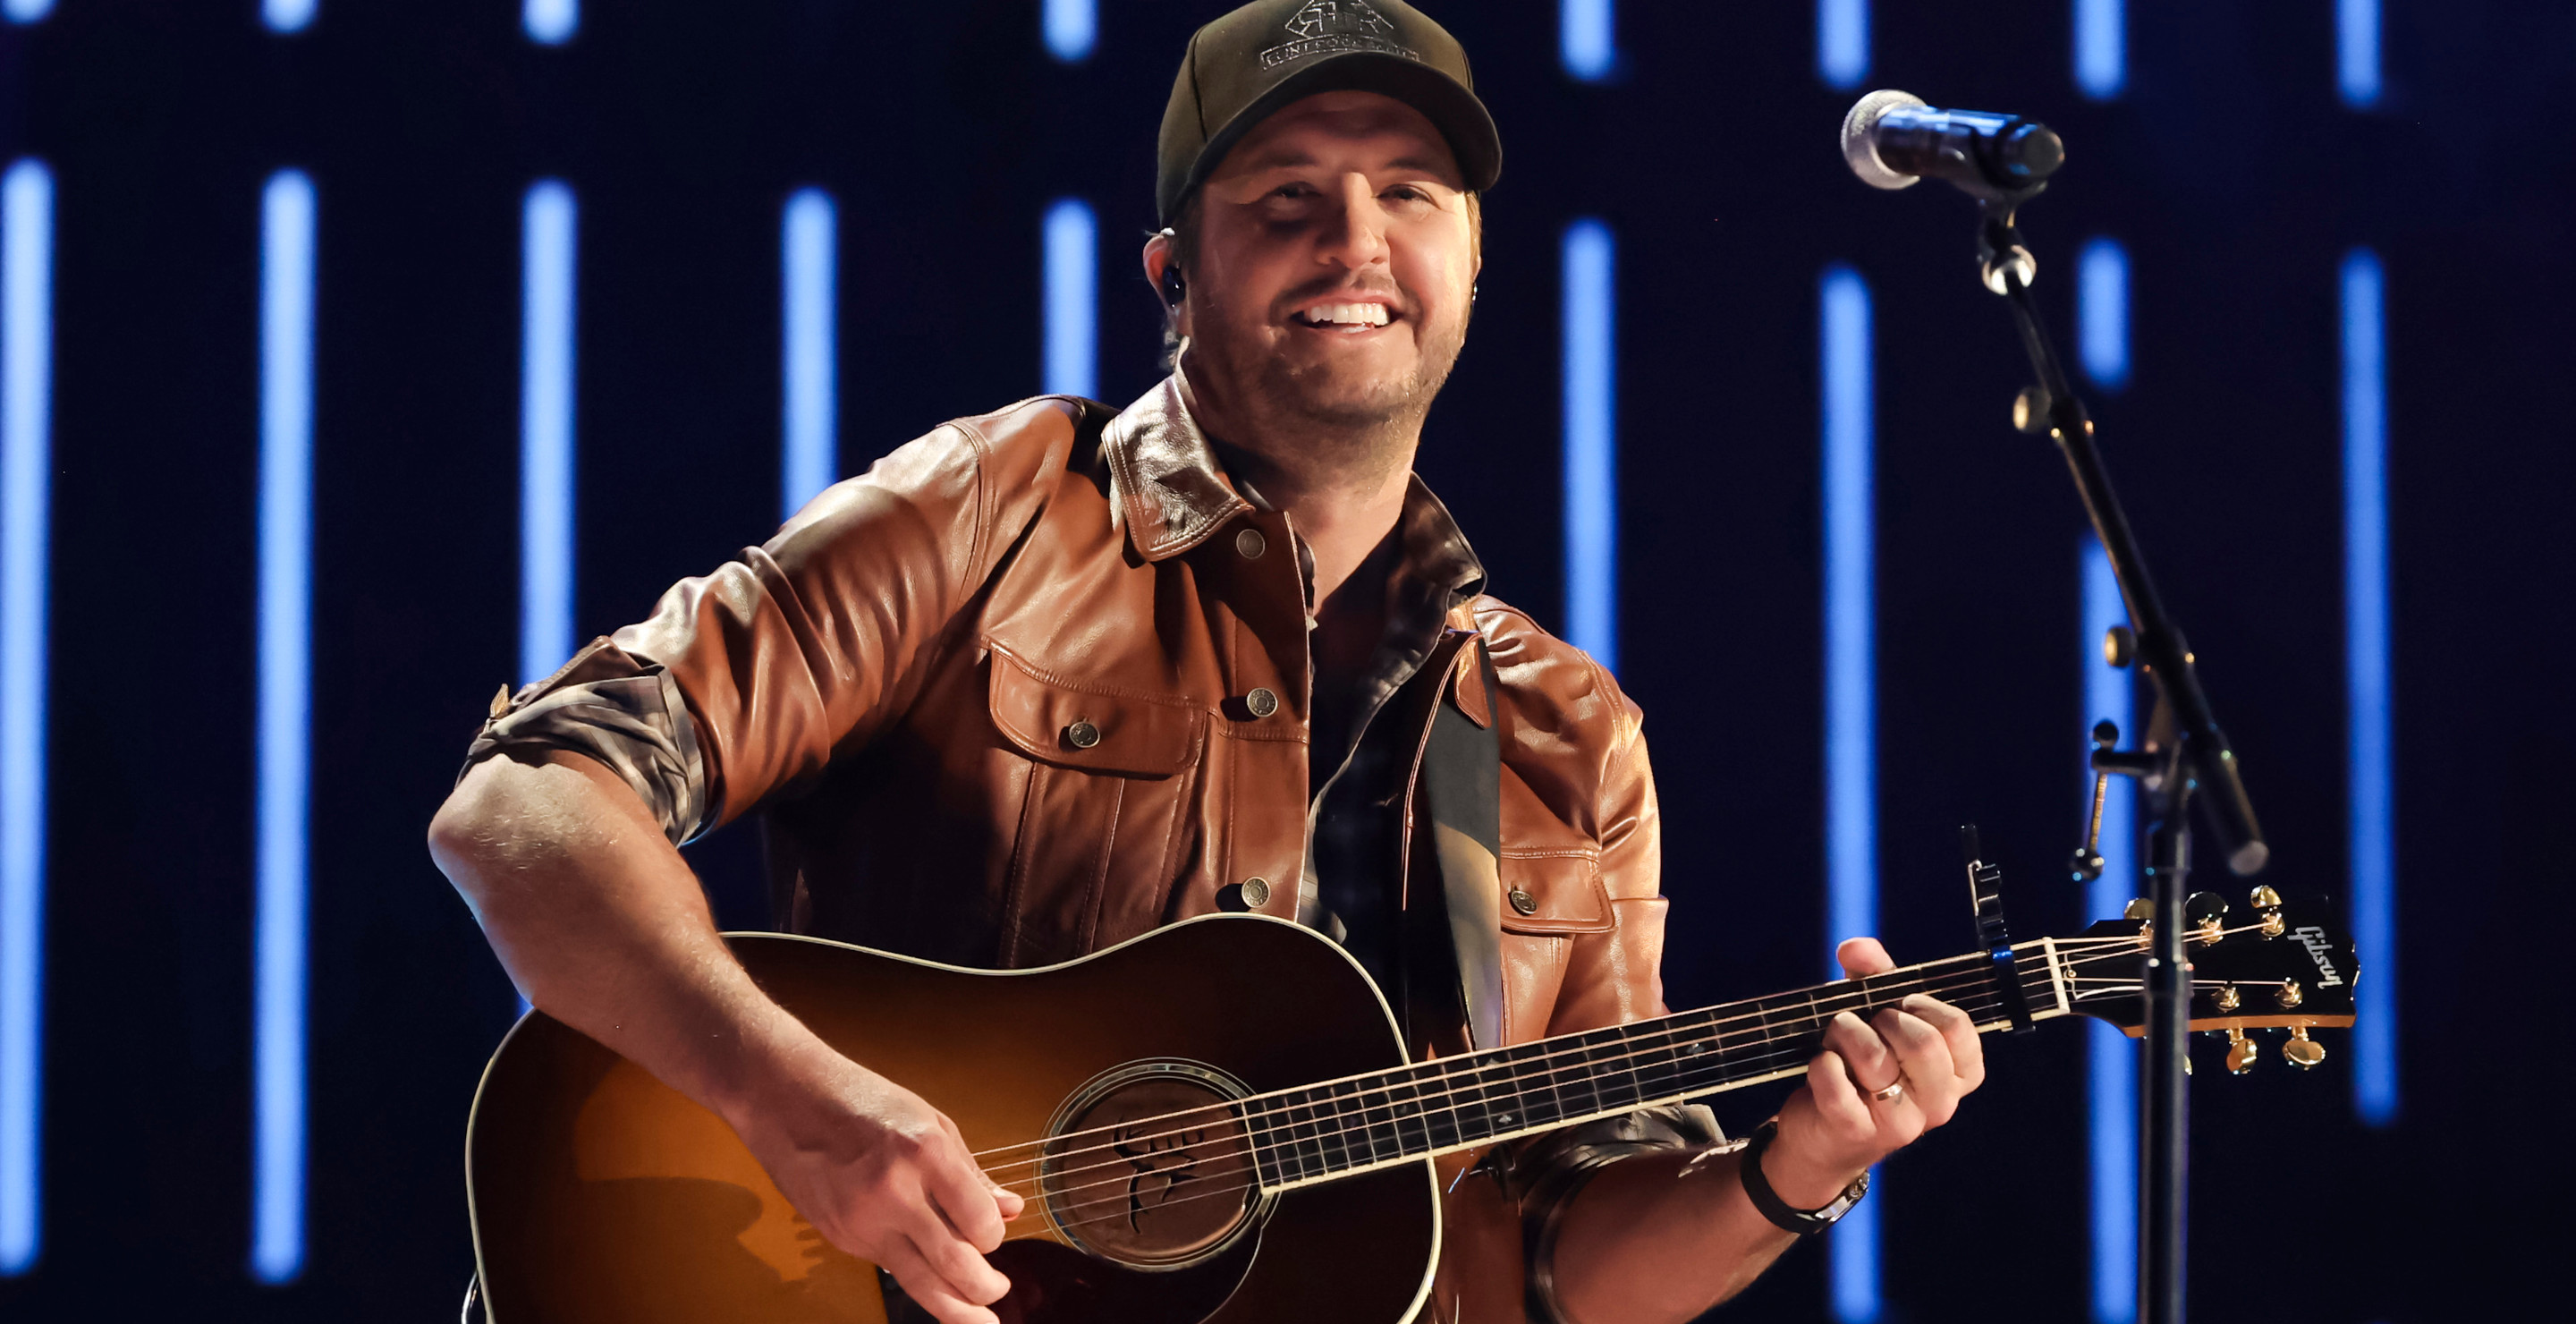 Luke Bryan's Bar Says It Only Served Missing 22-Year-Old Riley Strain "1 Alcoholic Drink"